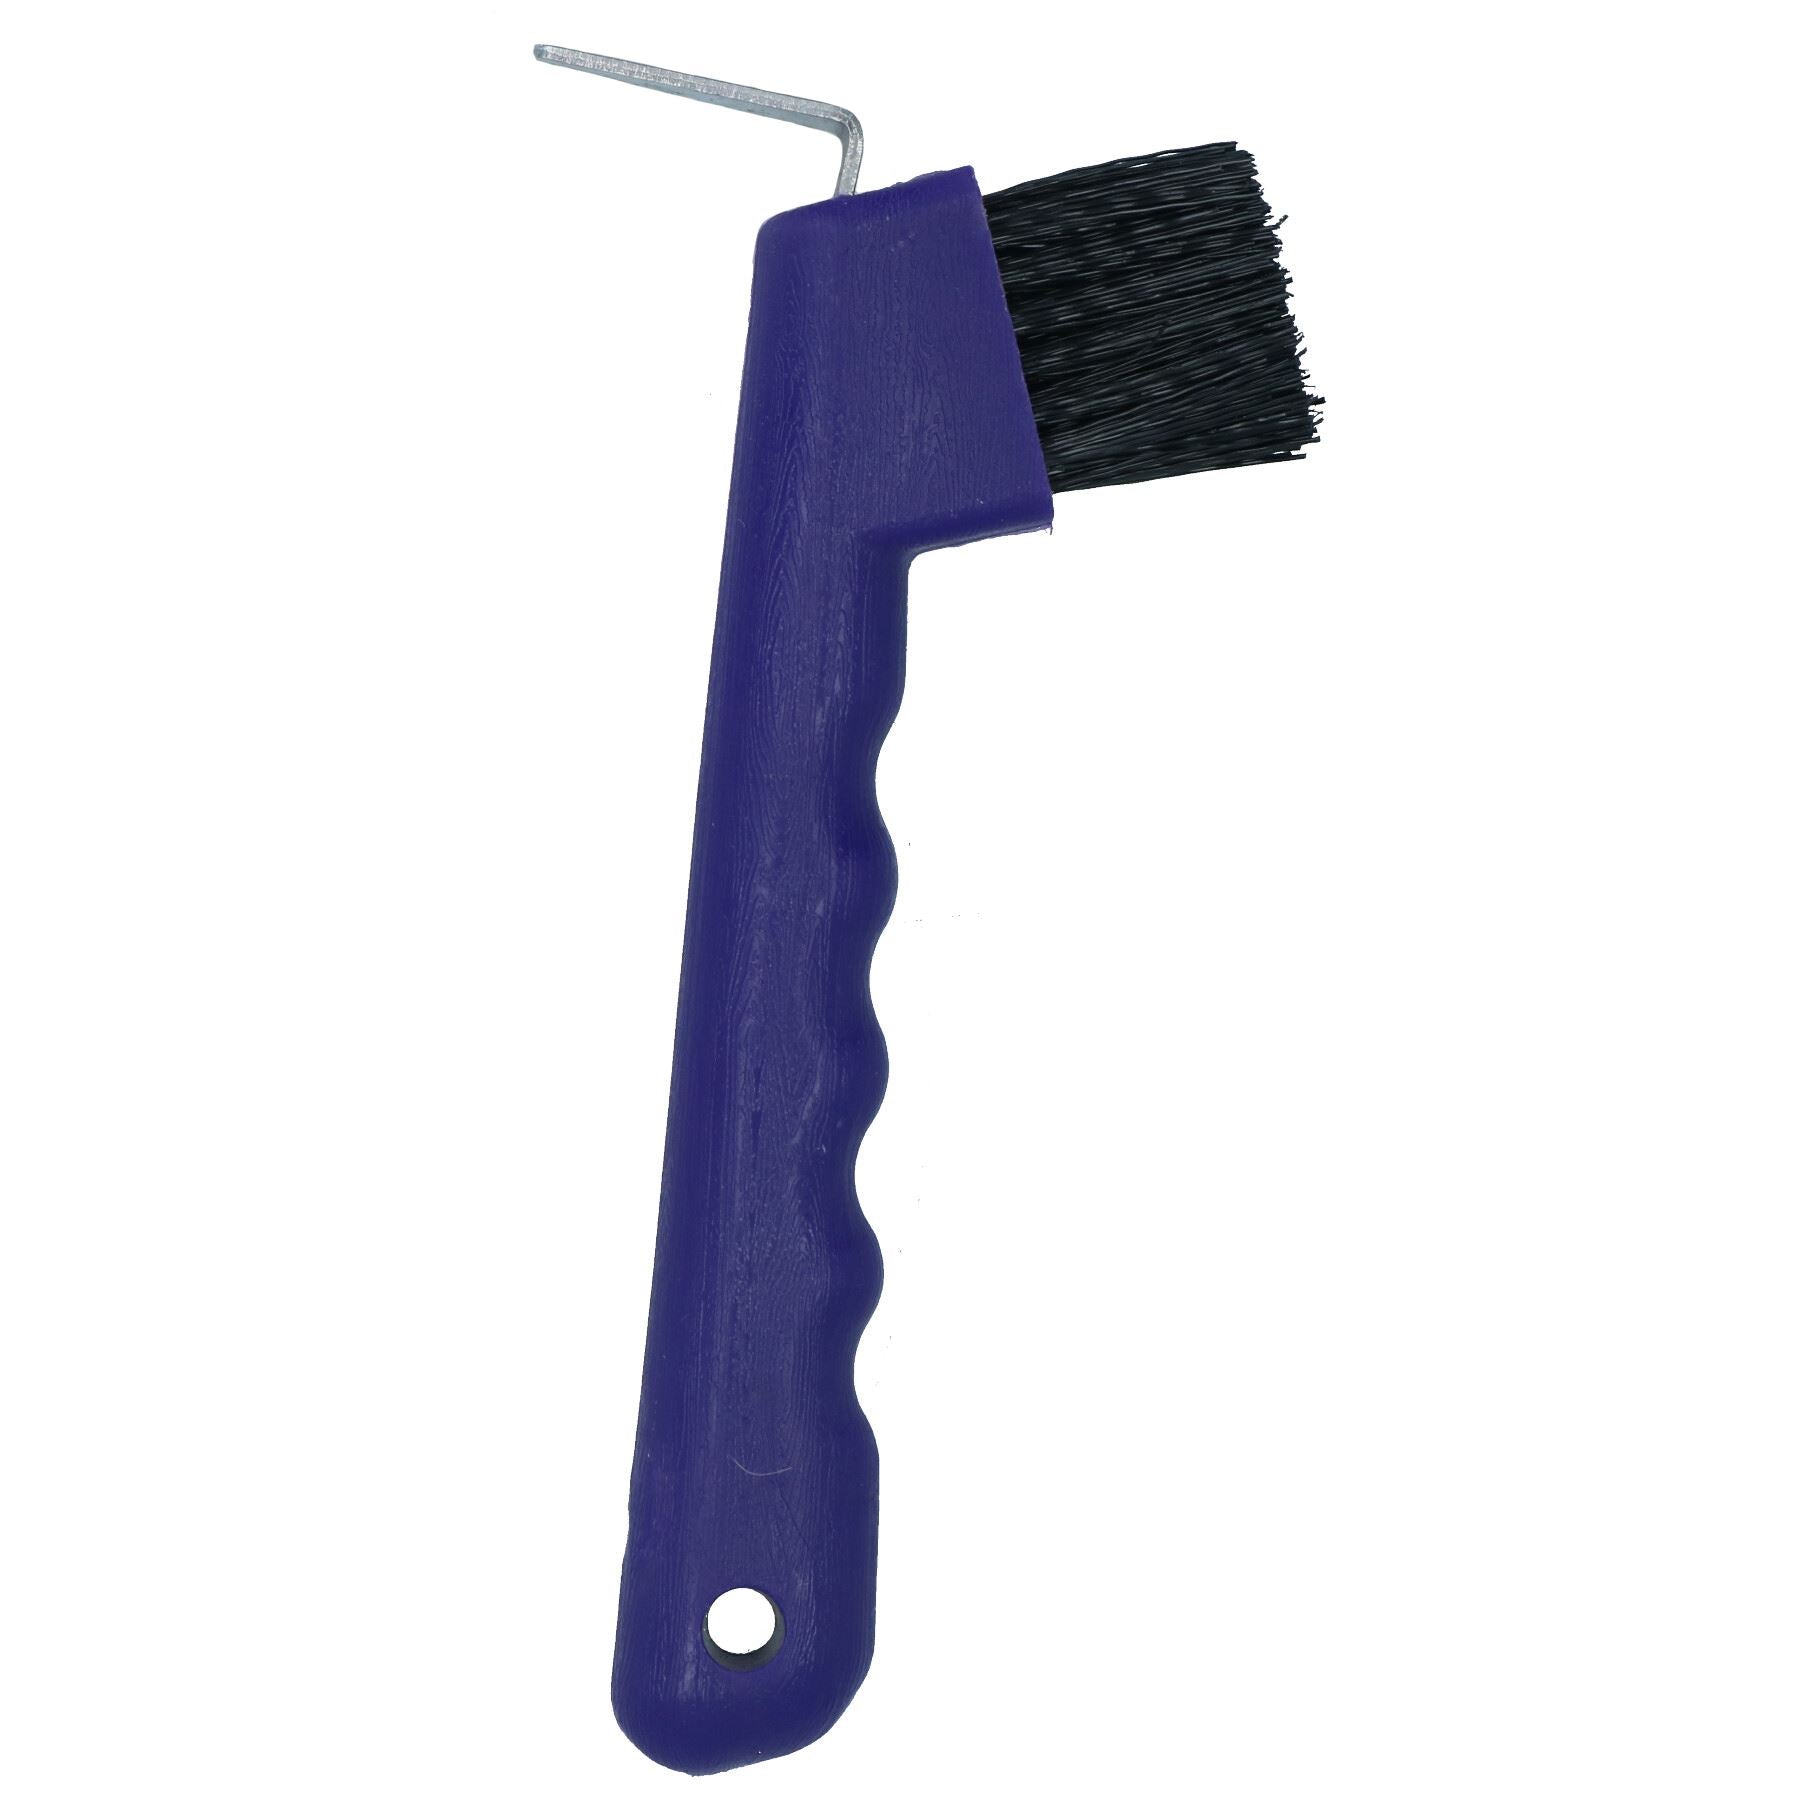 Durable Purple Horse Hoof Pick & Brush with Wave Grip Handle Stable Accessory